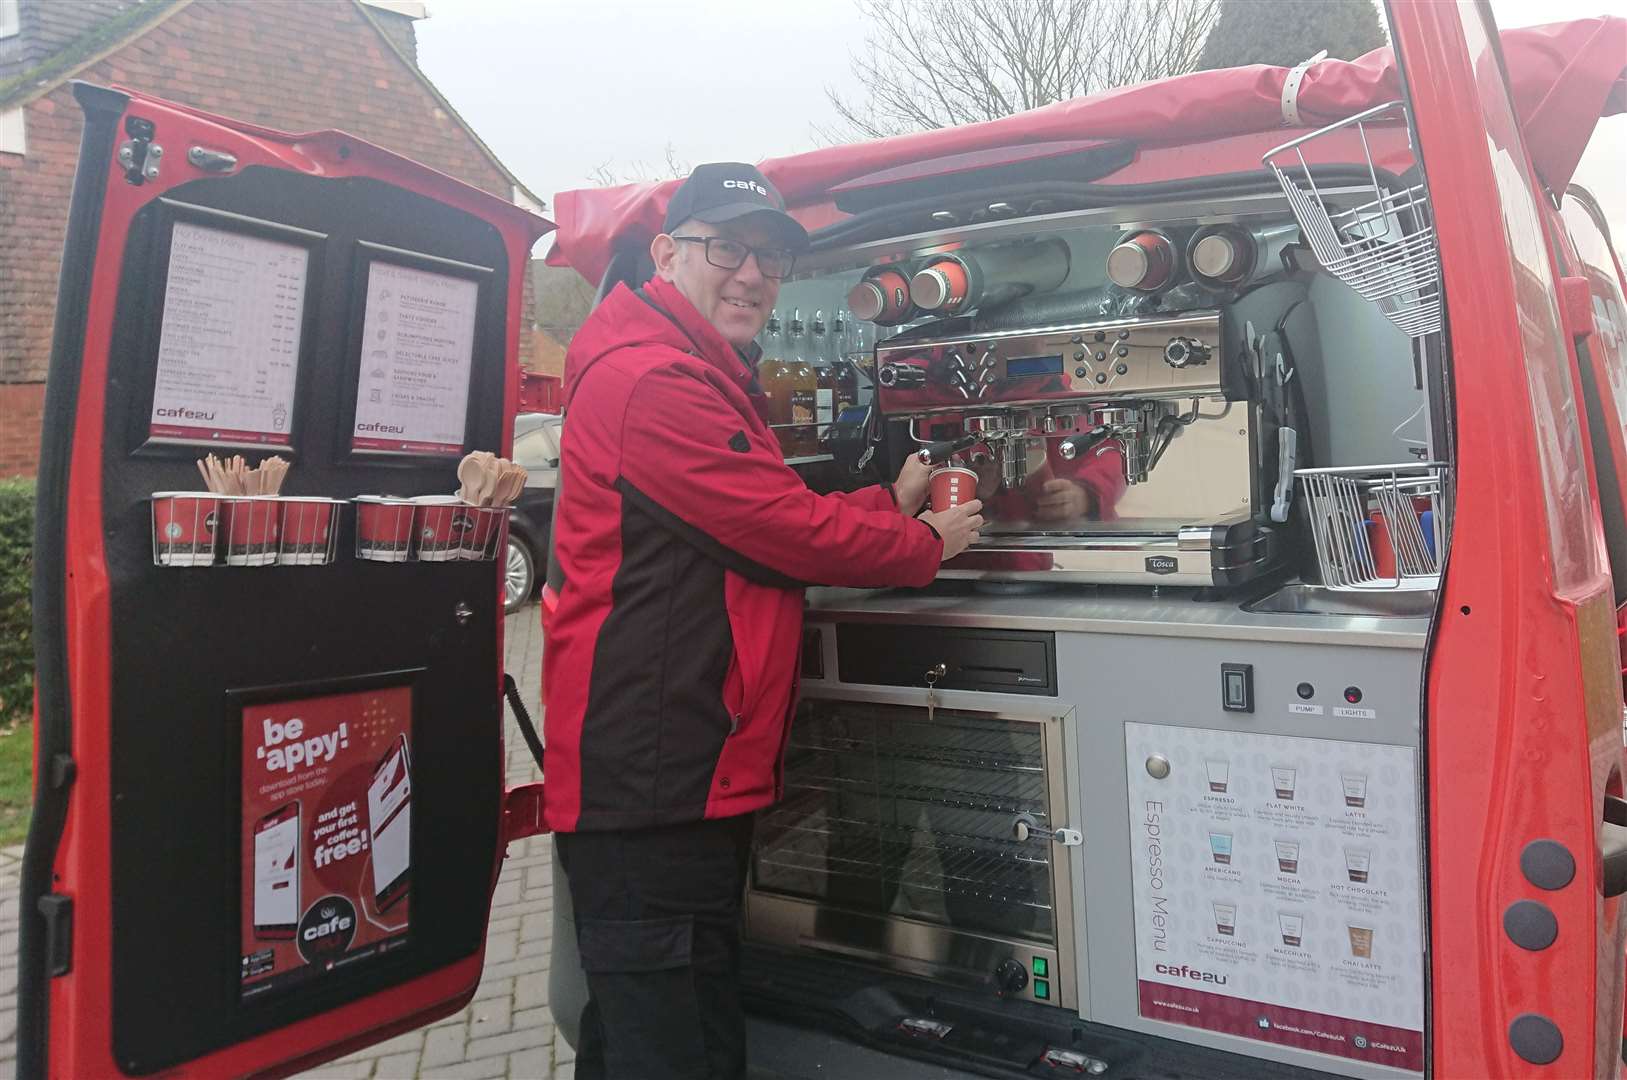 Scott Colmer and his new mobile coffee franchise in Dartford Cafe2U